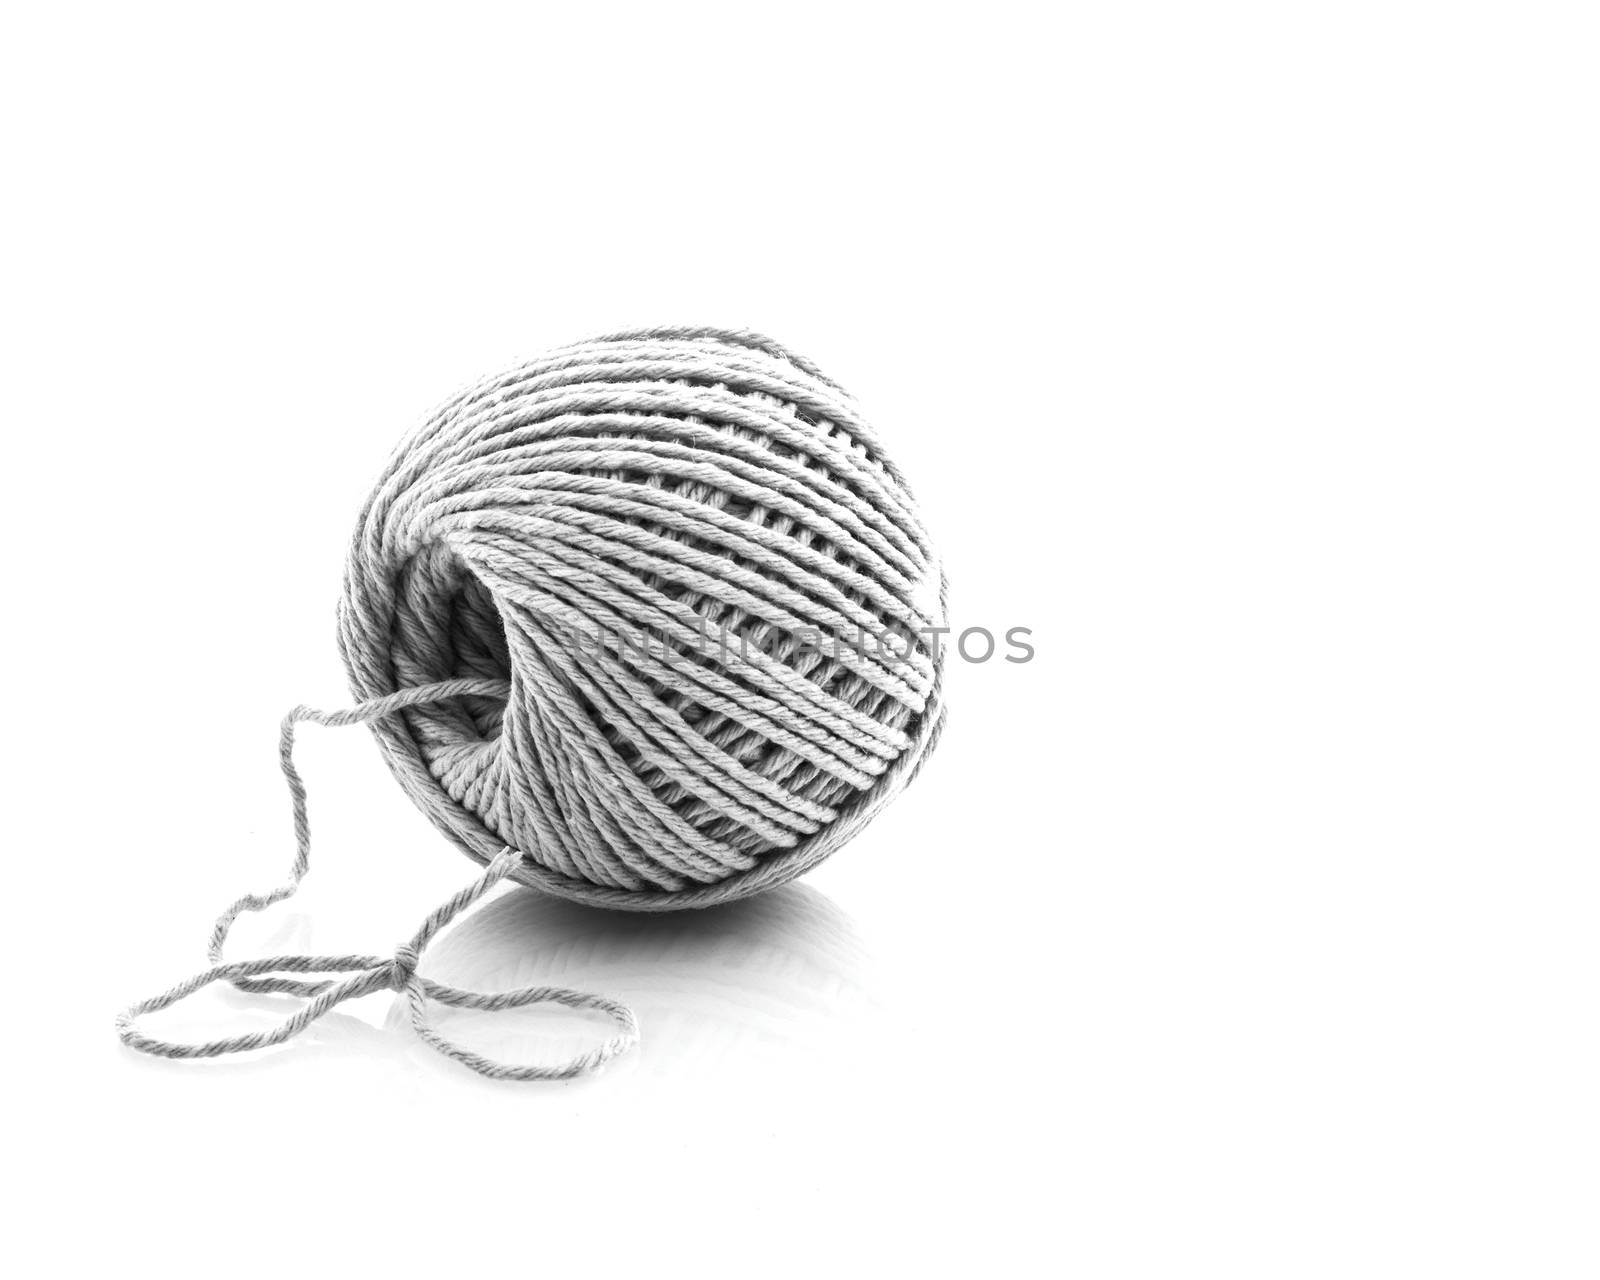 Macro Shot Of A Ball Of String With A Bow Tied At One End and Copy Space for Text